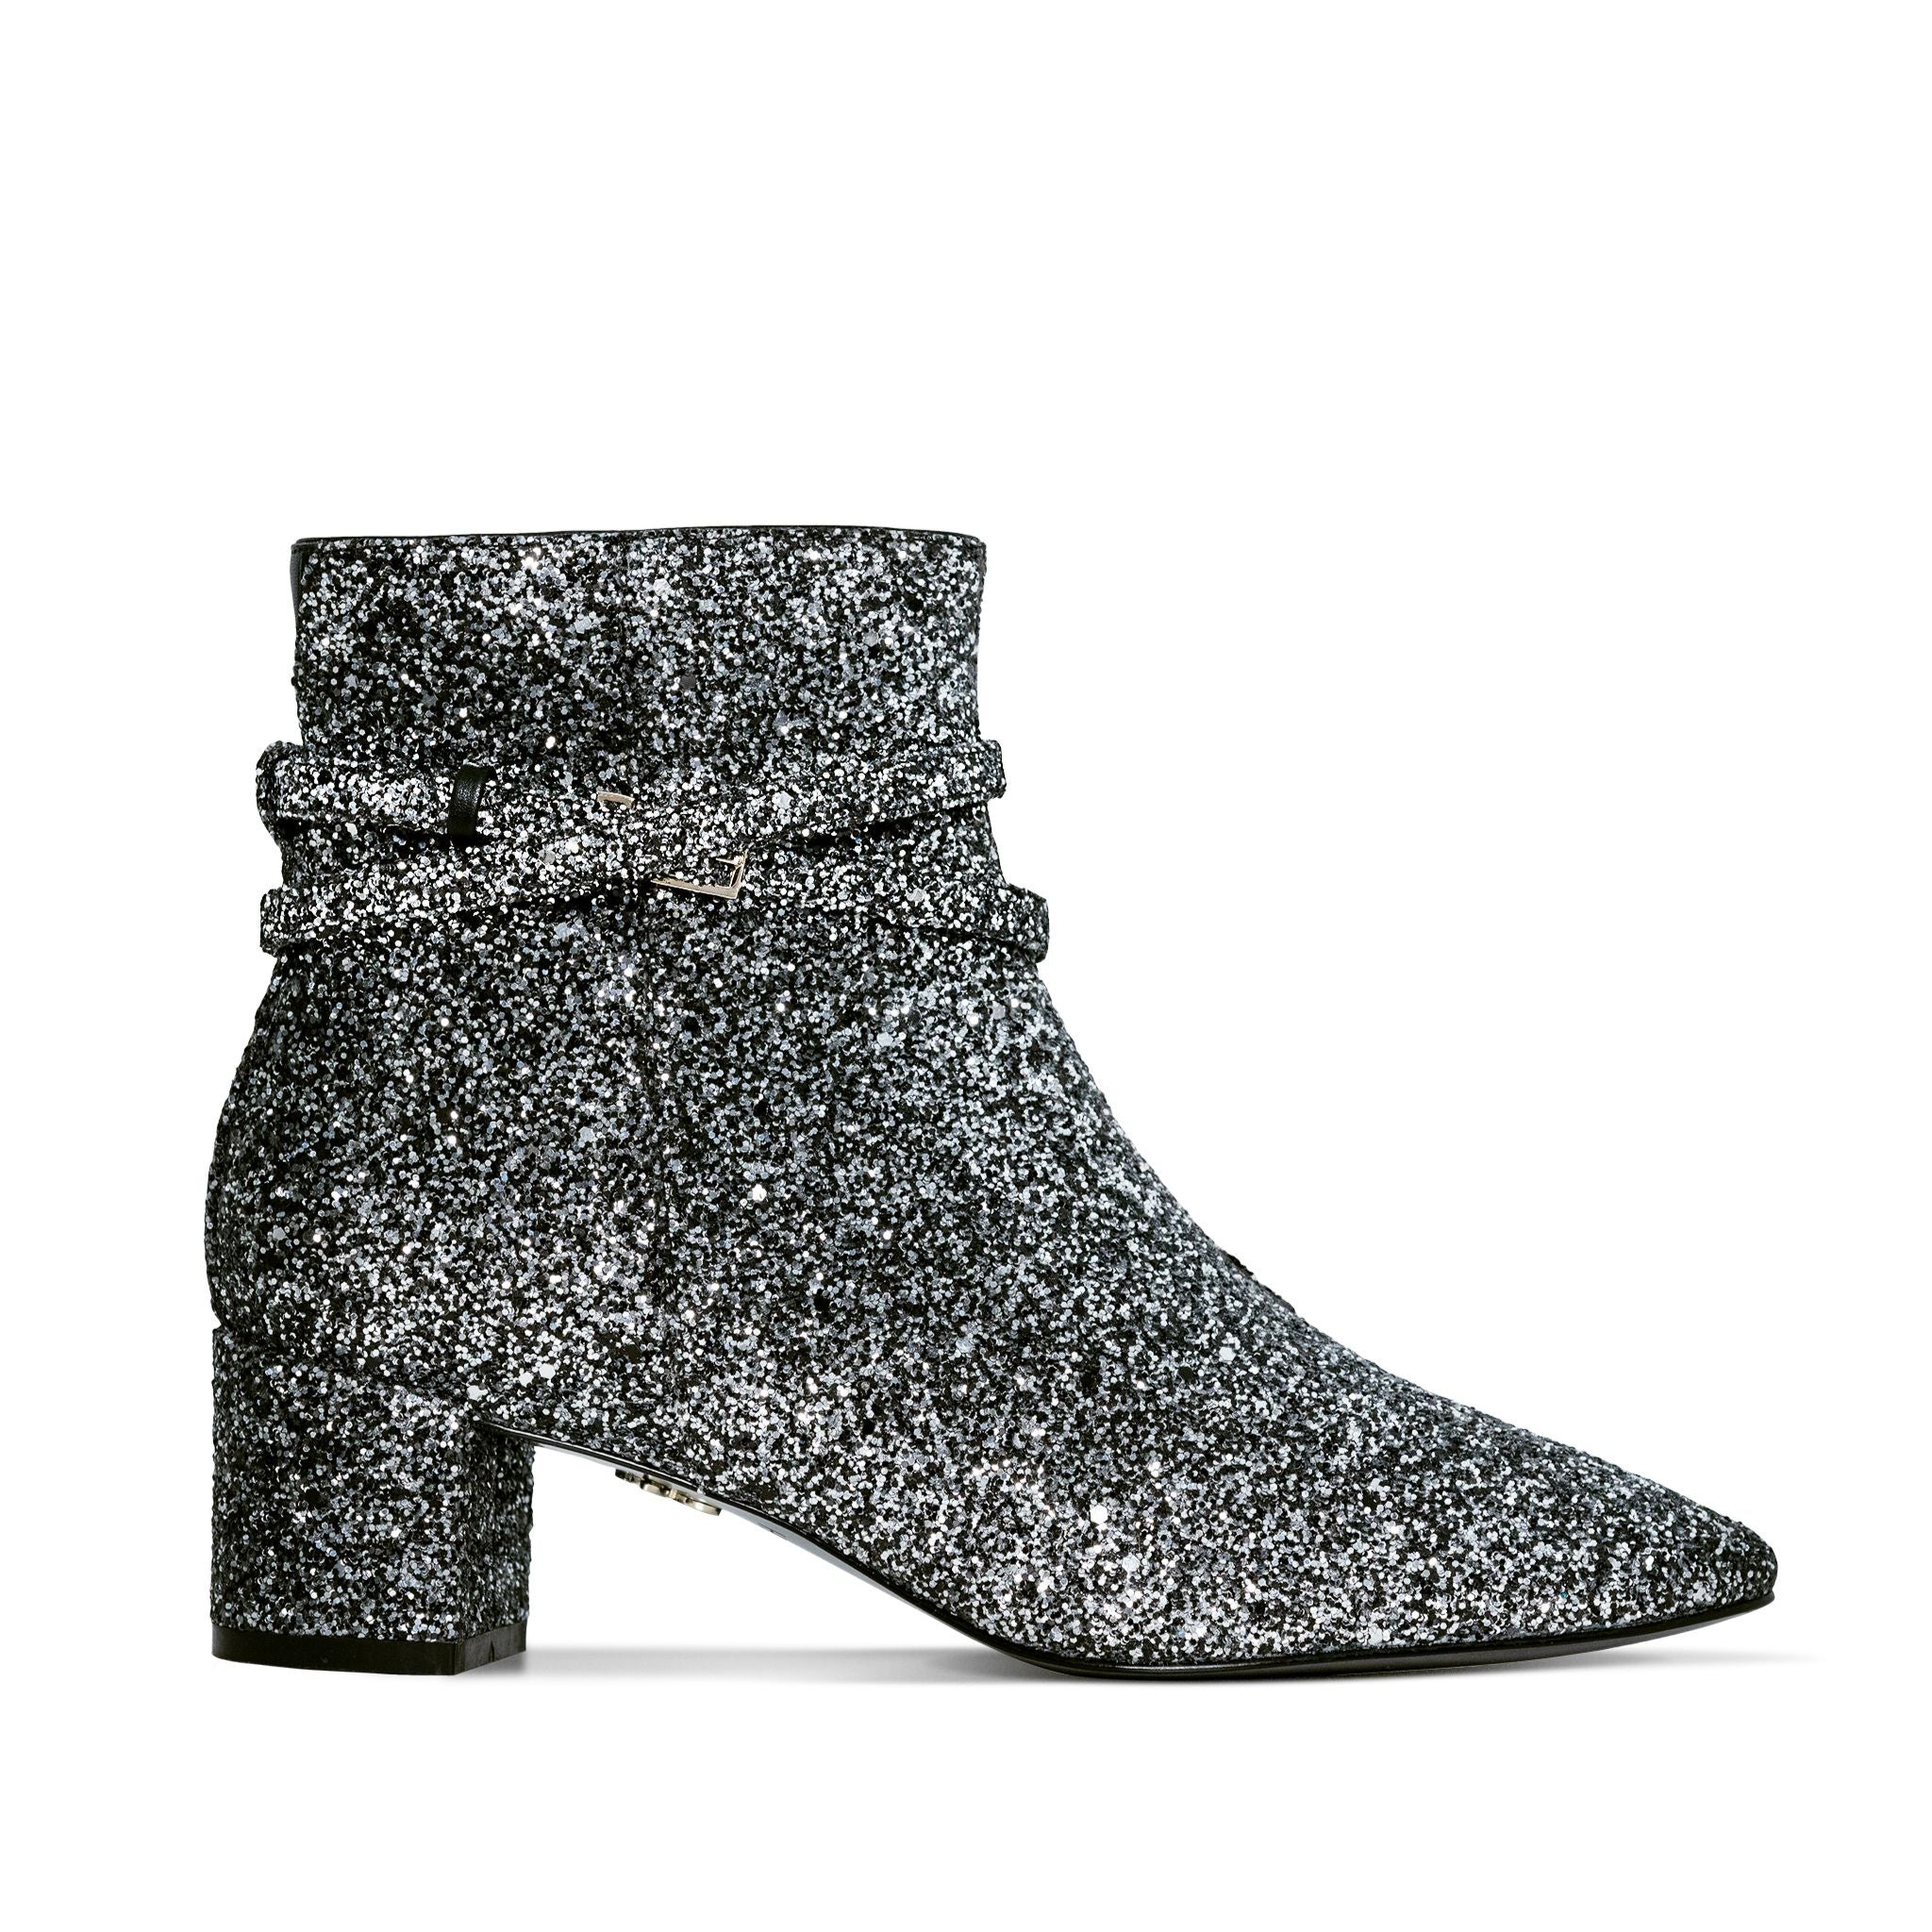 HEDY Ankle Boots in Diamond Dust Glitter- Sustainable Vegan Recycled ...